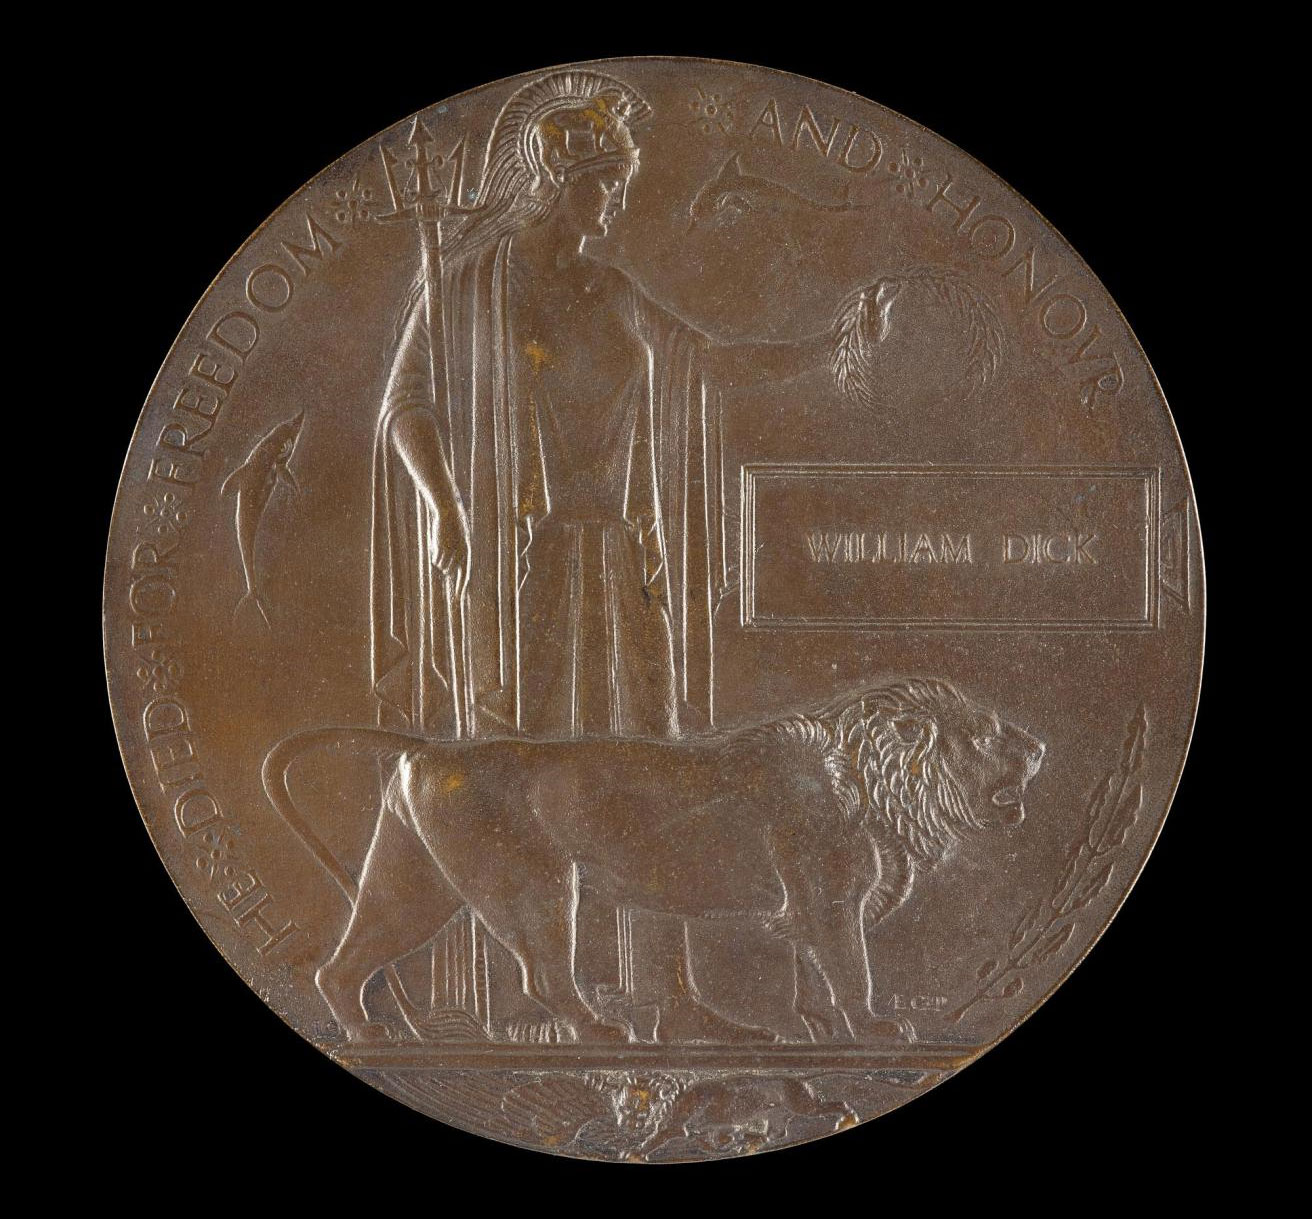 Memorial plaque sent to the wife of William Dick after his death from shrapnel wounds inflicted in trenches near Ypres. 